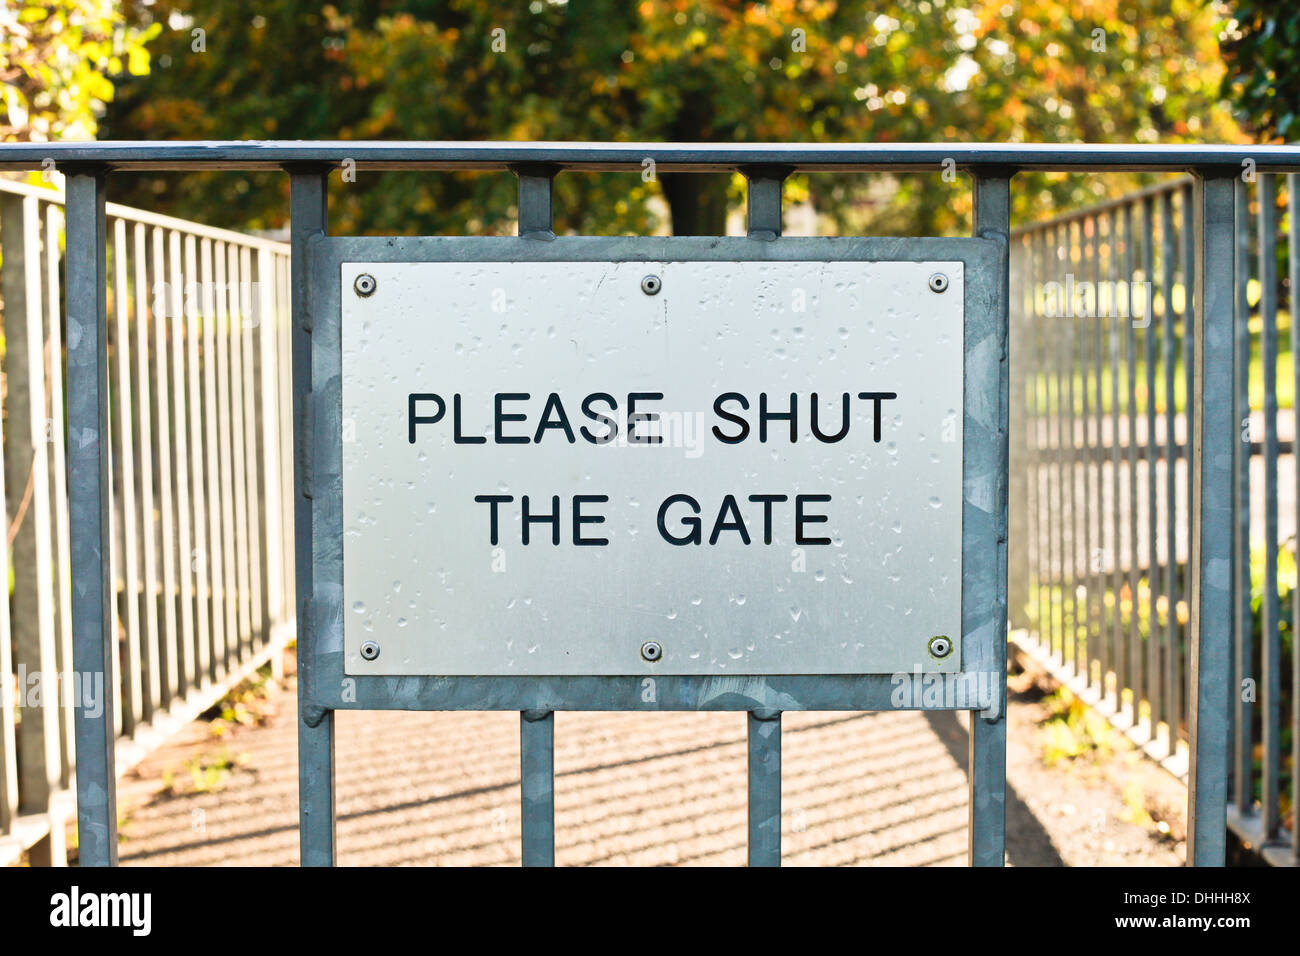 Metallic sign requesting people to shut the gate Stock Photo